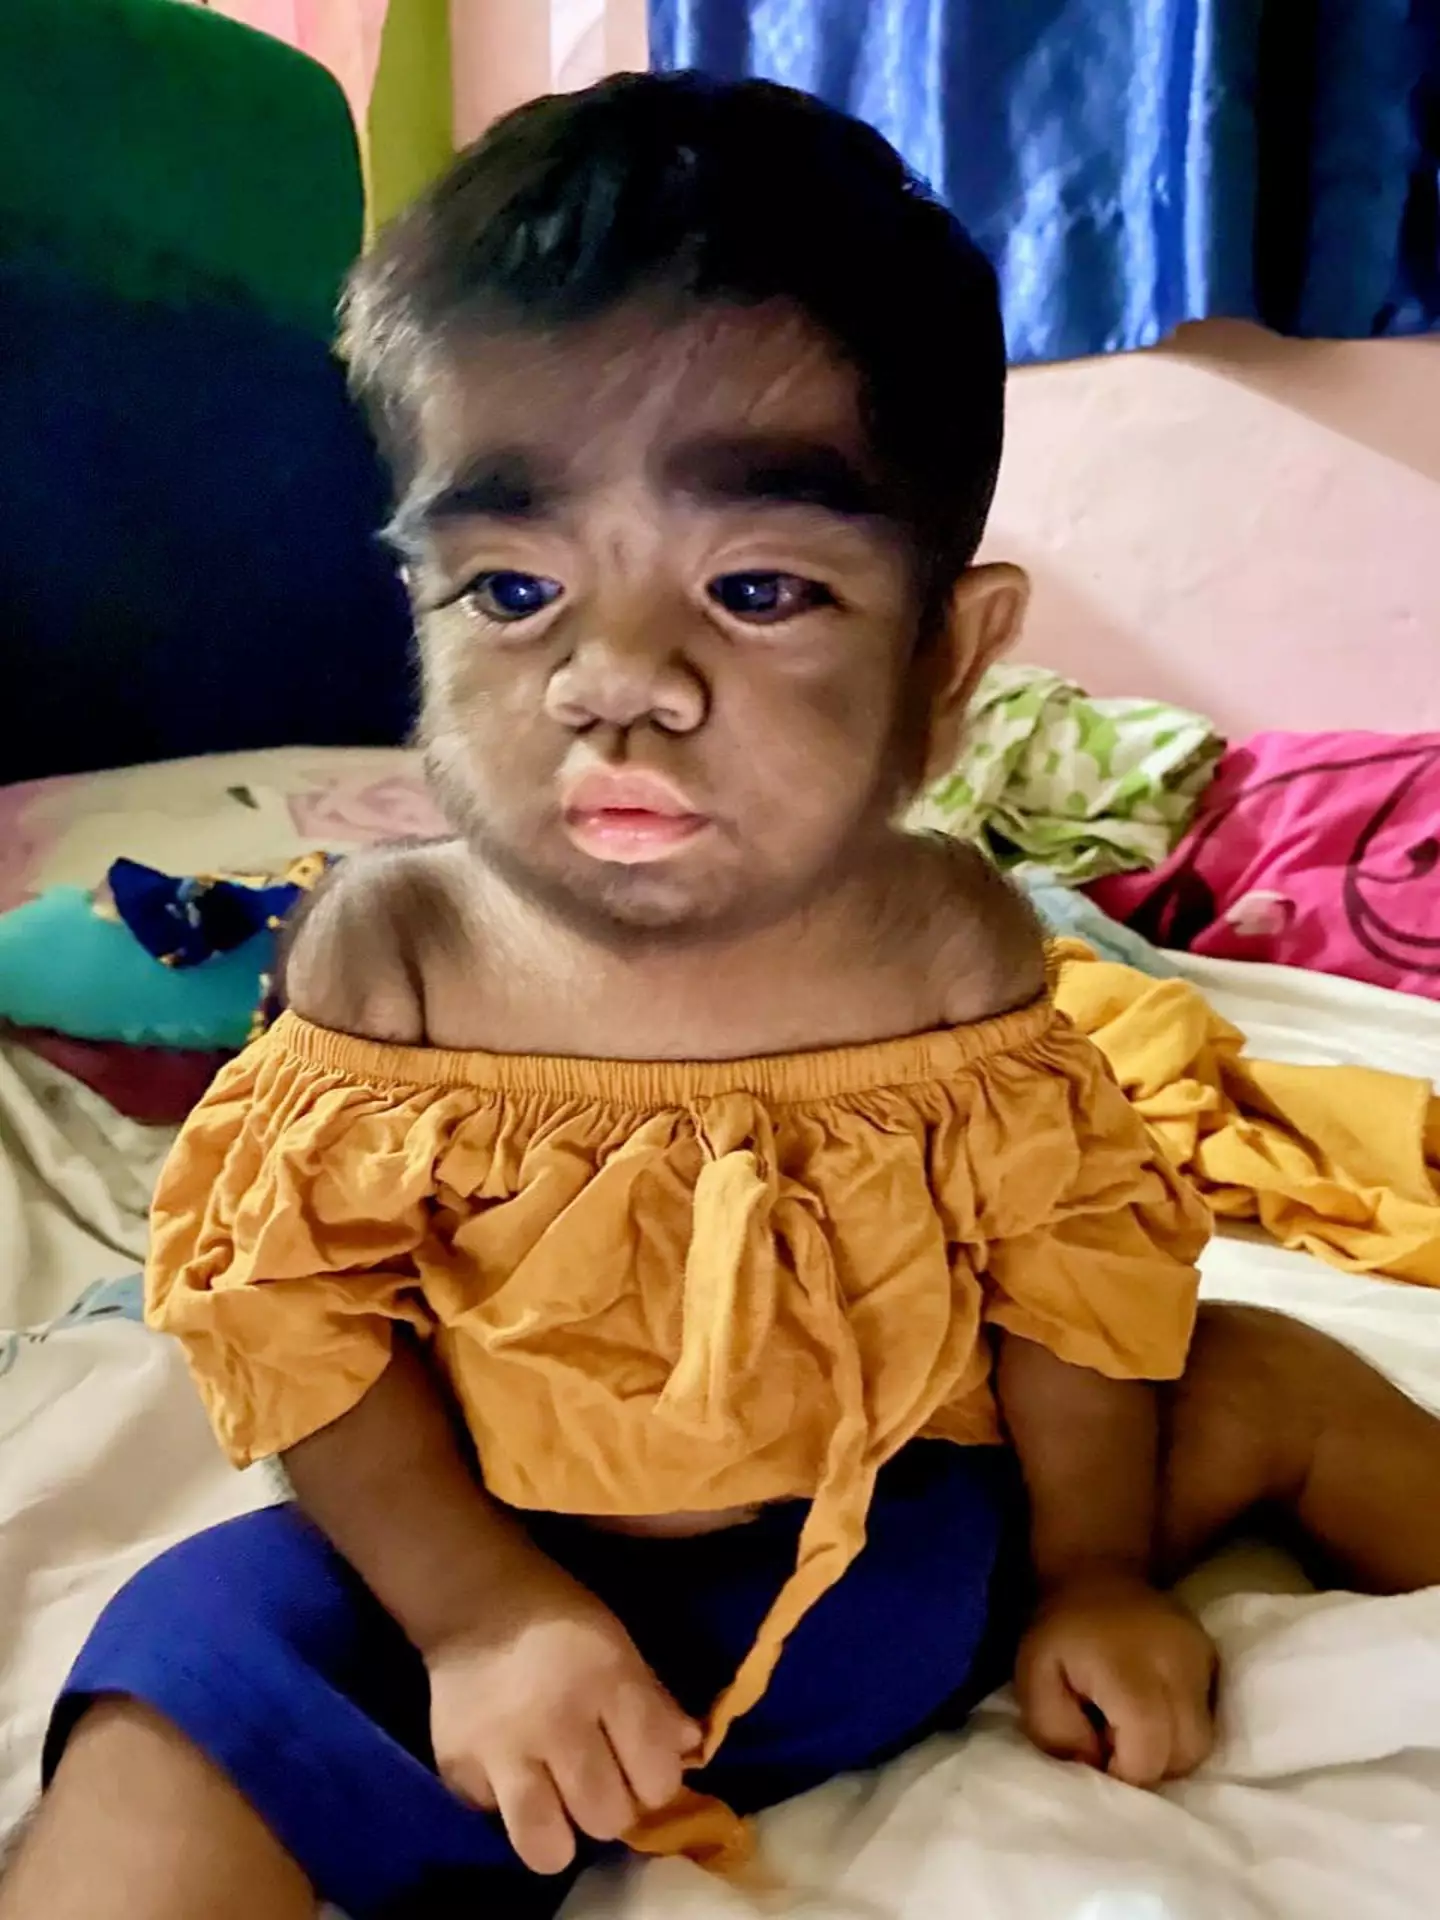 Two-year-old Jaren Gamongan has 'werewolf syndrome', which causes his face and body to be covered with hair. (ViralPress)